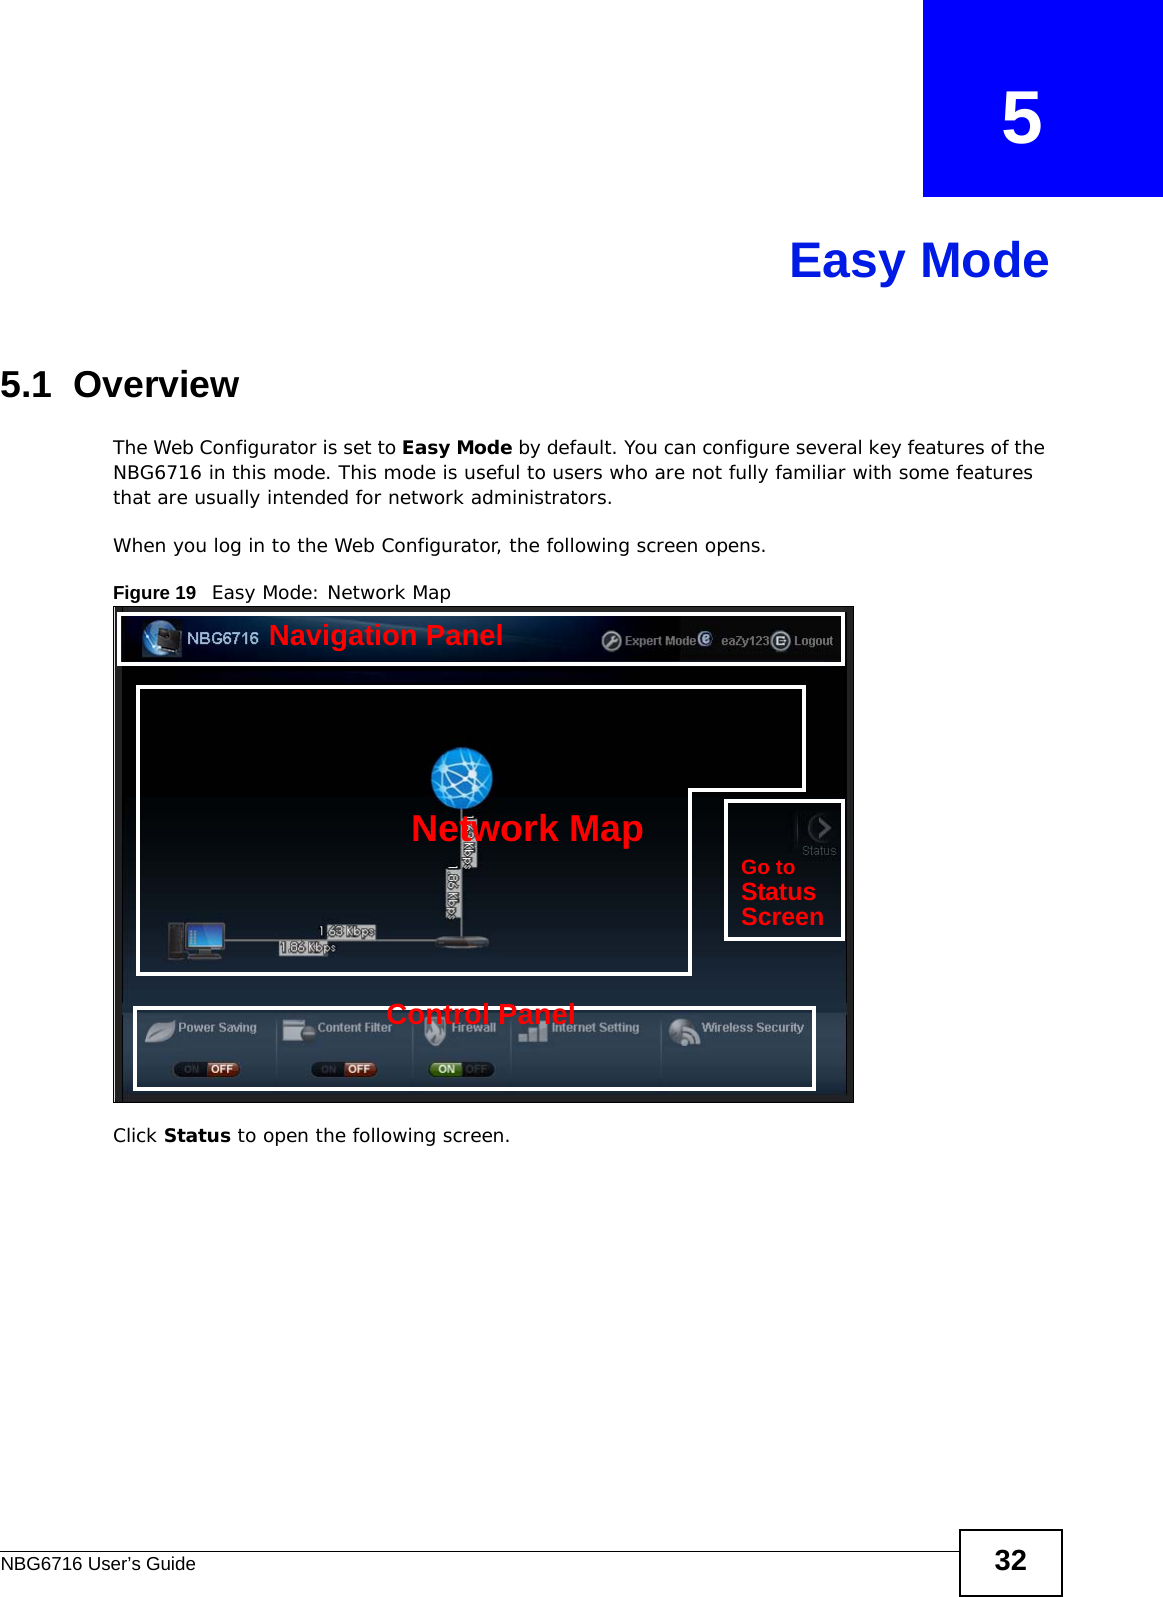 NBG6716 User’s Guide 32CHAPTER   5Easy Mode5.1  OverviewThe Web Configurator is set to Easy Mode by default. You can configure several key features of the NBG6716 in this mode. This mode is useful to users who are not fully familiar with some features that are usually intended for network administrators.When you log in to the Web Configurator, the following screen opens.Figure 19   Easy Mode: Network Map Click Status to open the following screen.Network MapControl PanelGo toStatusScreenNavigation Panel